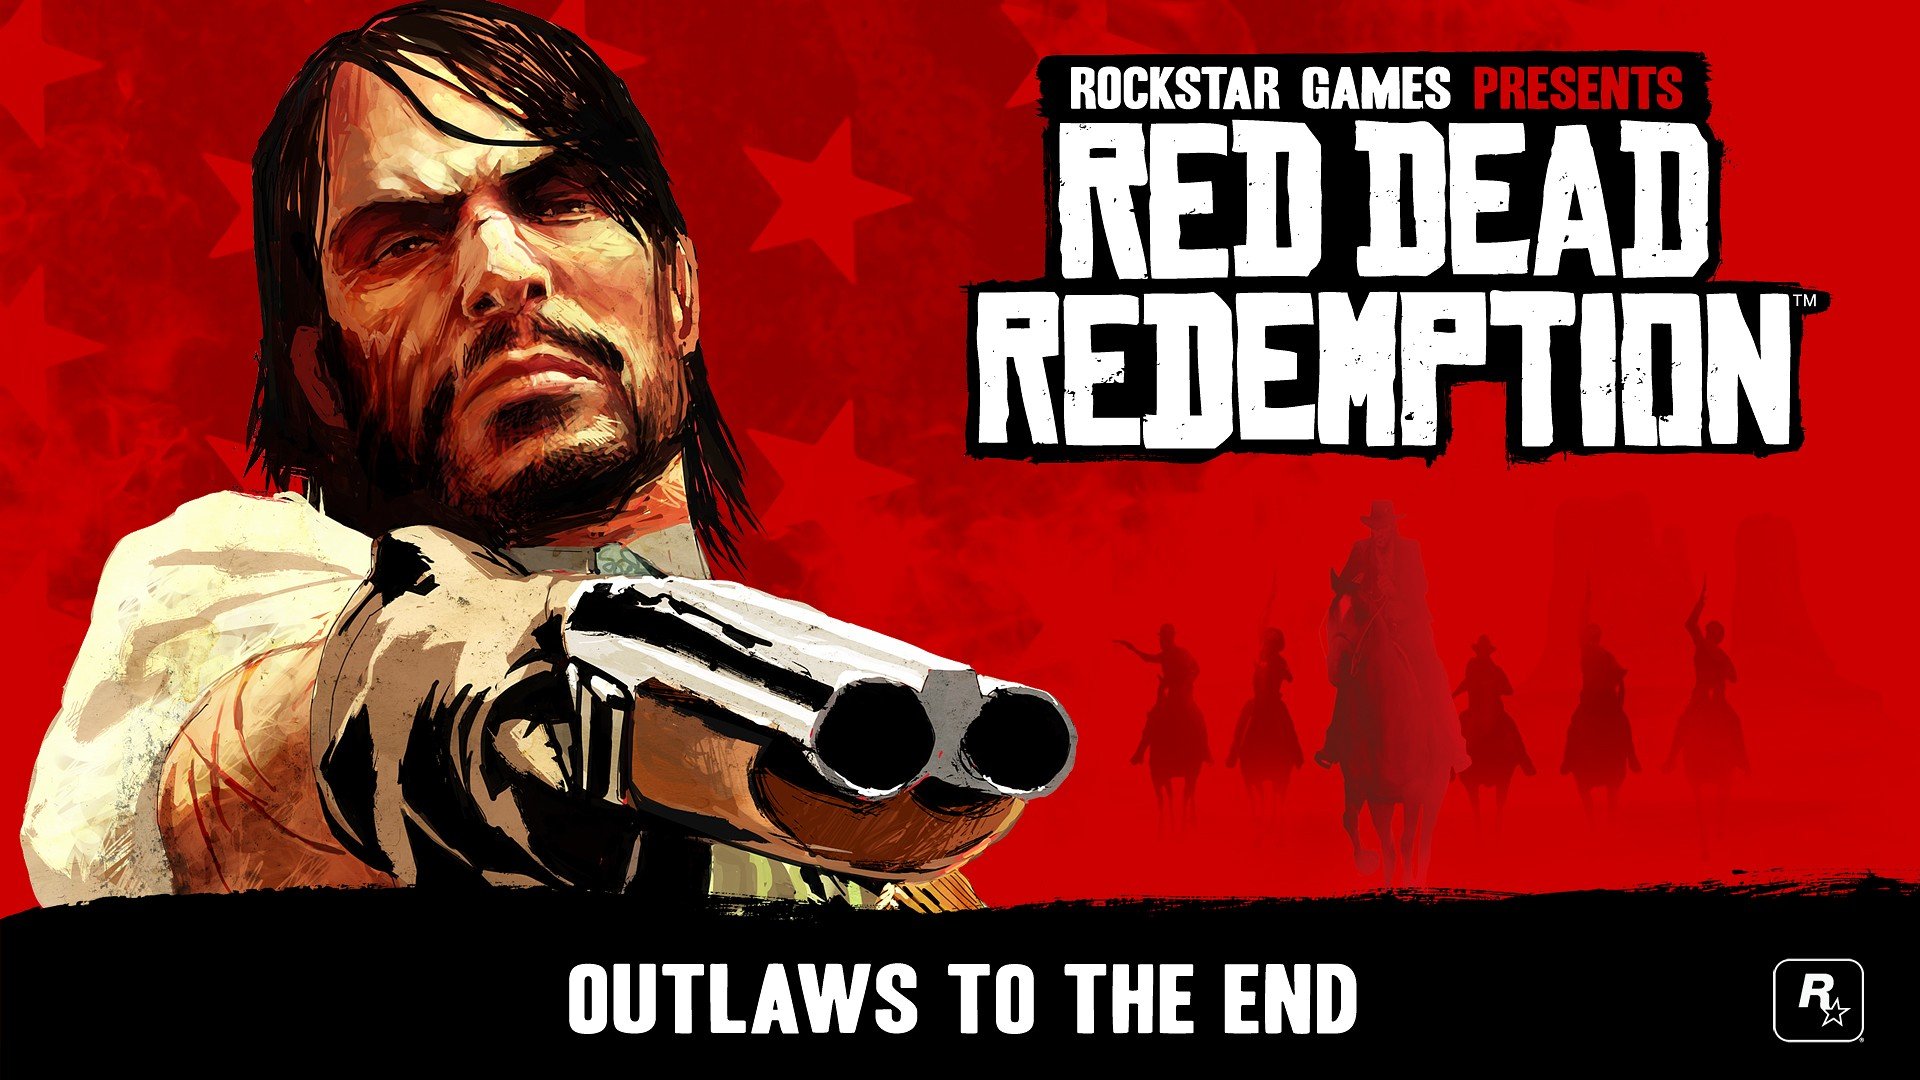 video, Games, Grand, Theft, Auto, Red, Dead, Redemption, Marston, Rockstar, Games, Grand, Theft, Auto, Iii Wallpaper